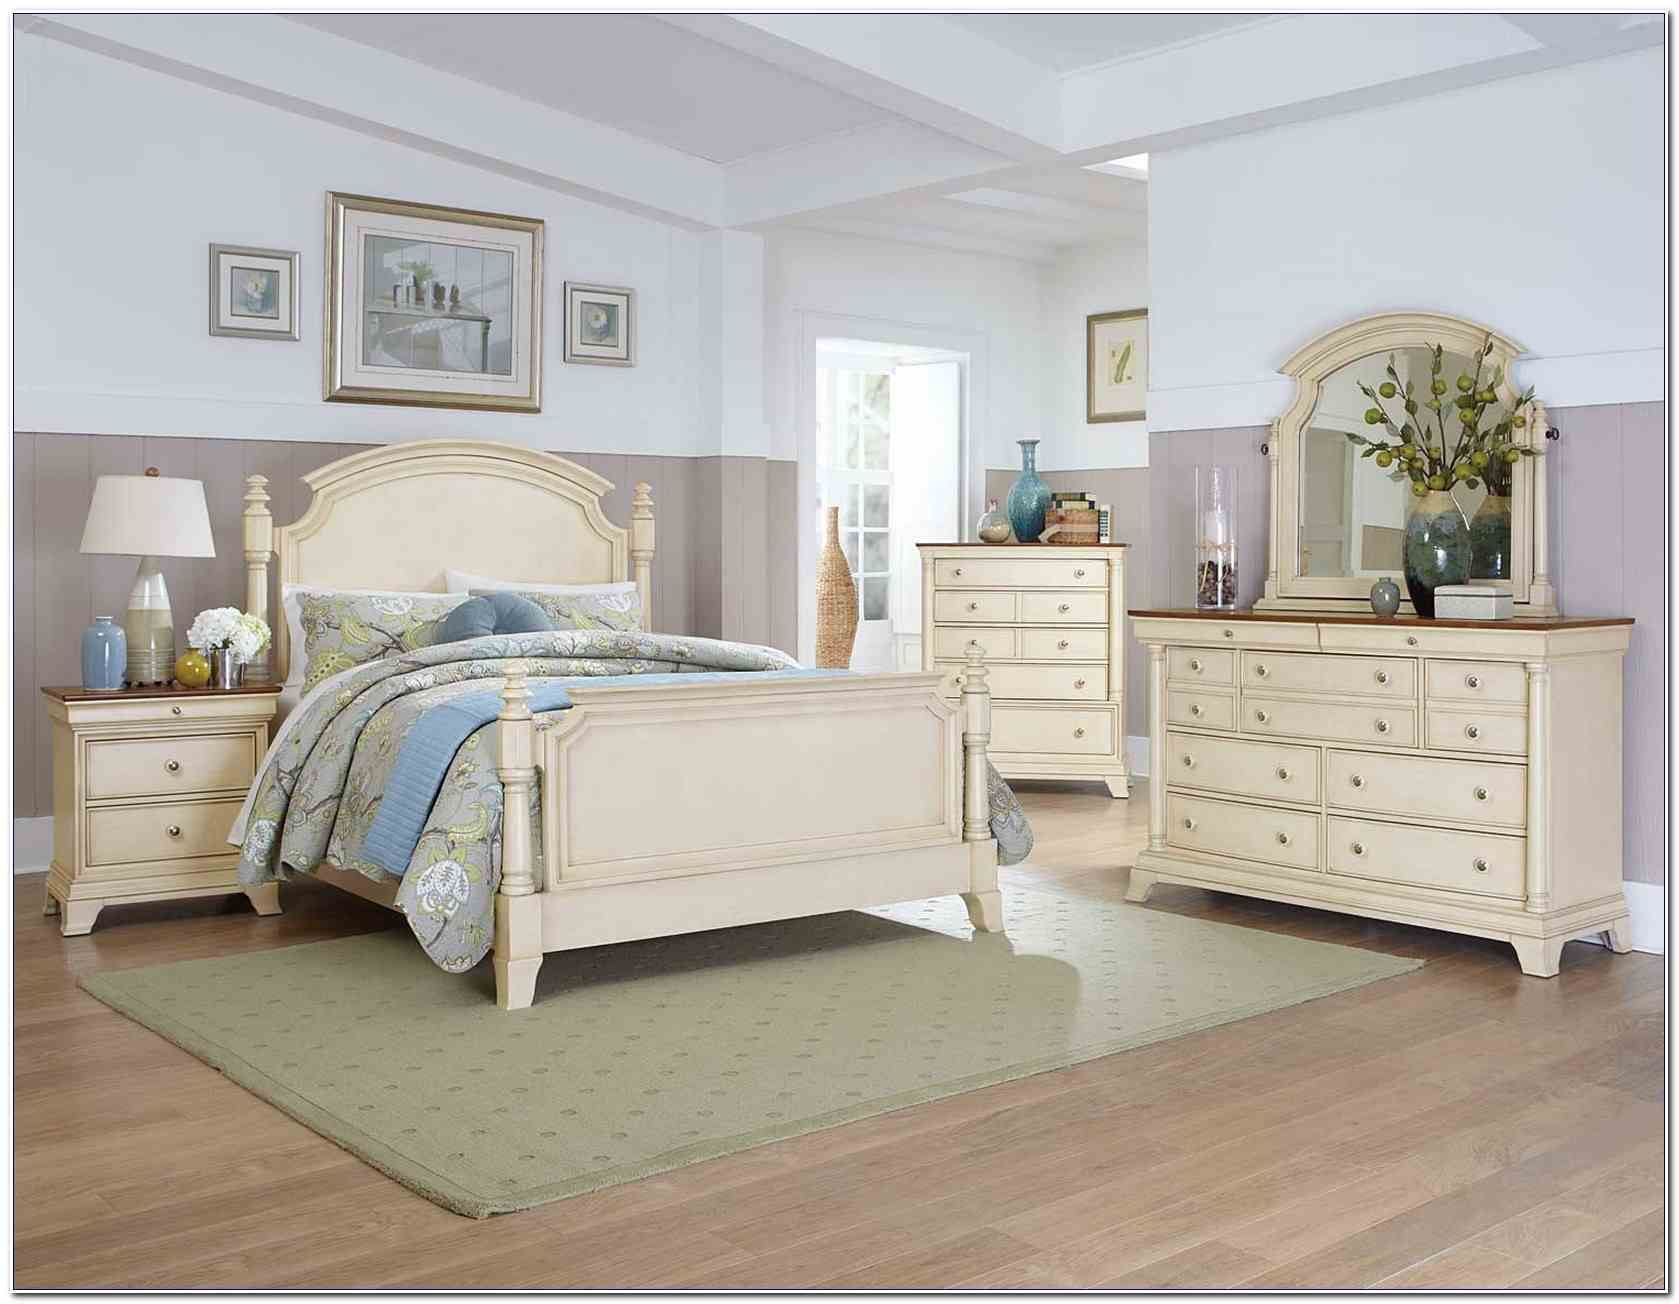 Cream Colored Bedroom Furniture Sets Bedroom Ideas White Bedroom throughout sizing 1679 X 1304